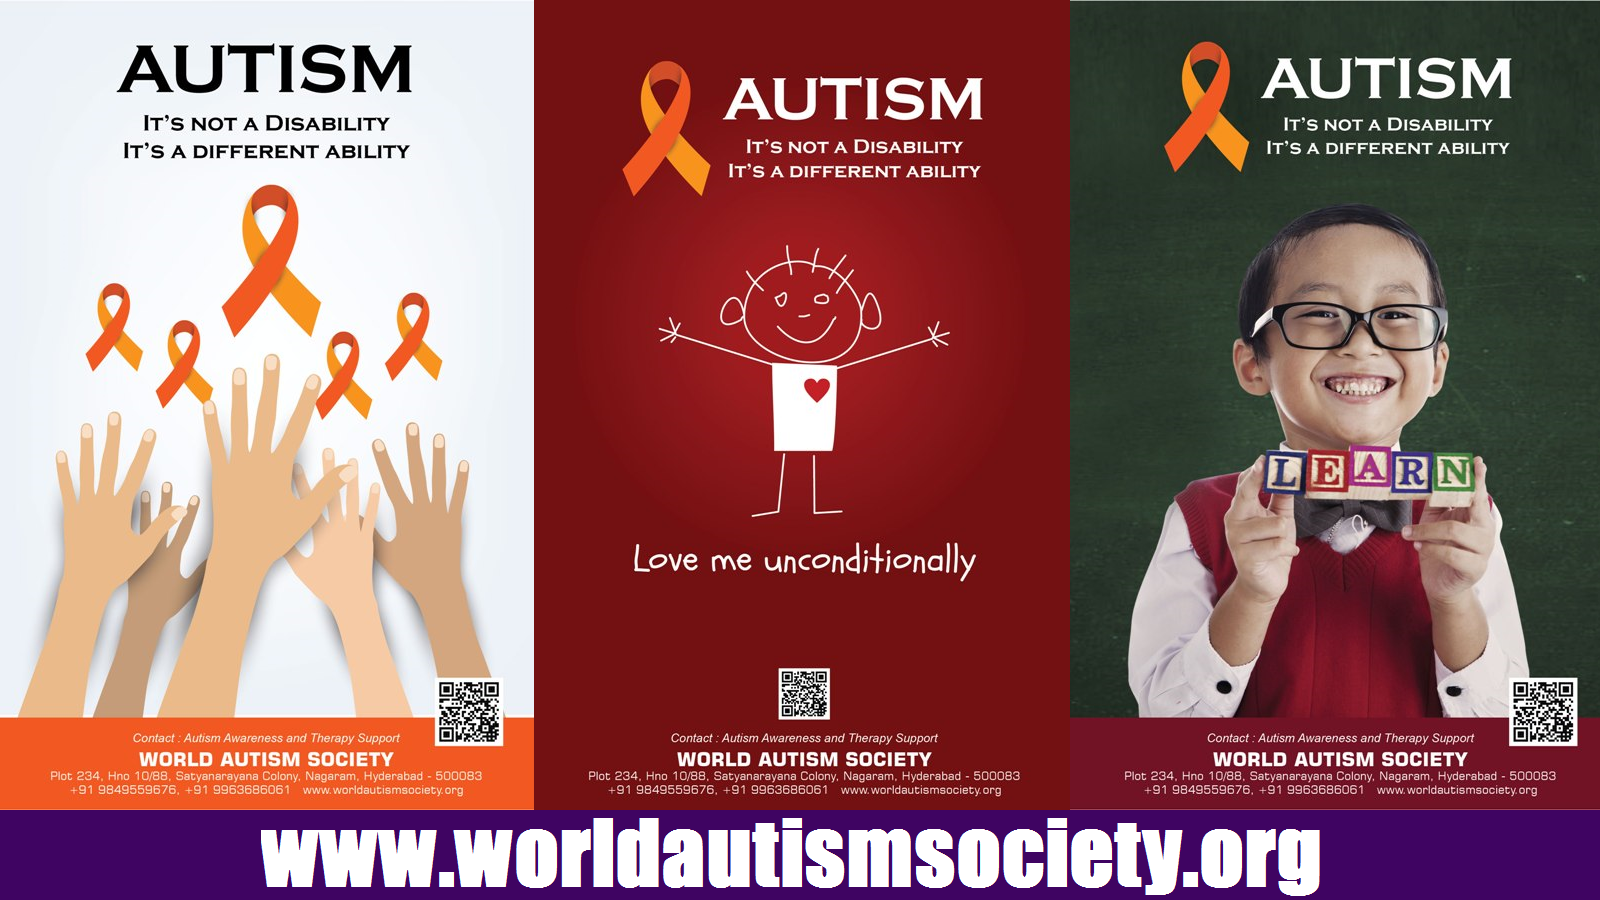 World Autism Society - 2nd April World Autism Awareness Day - Autism Movie